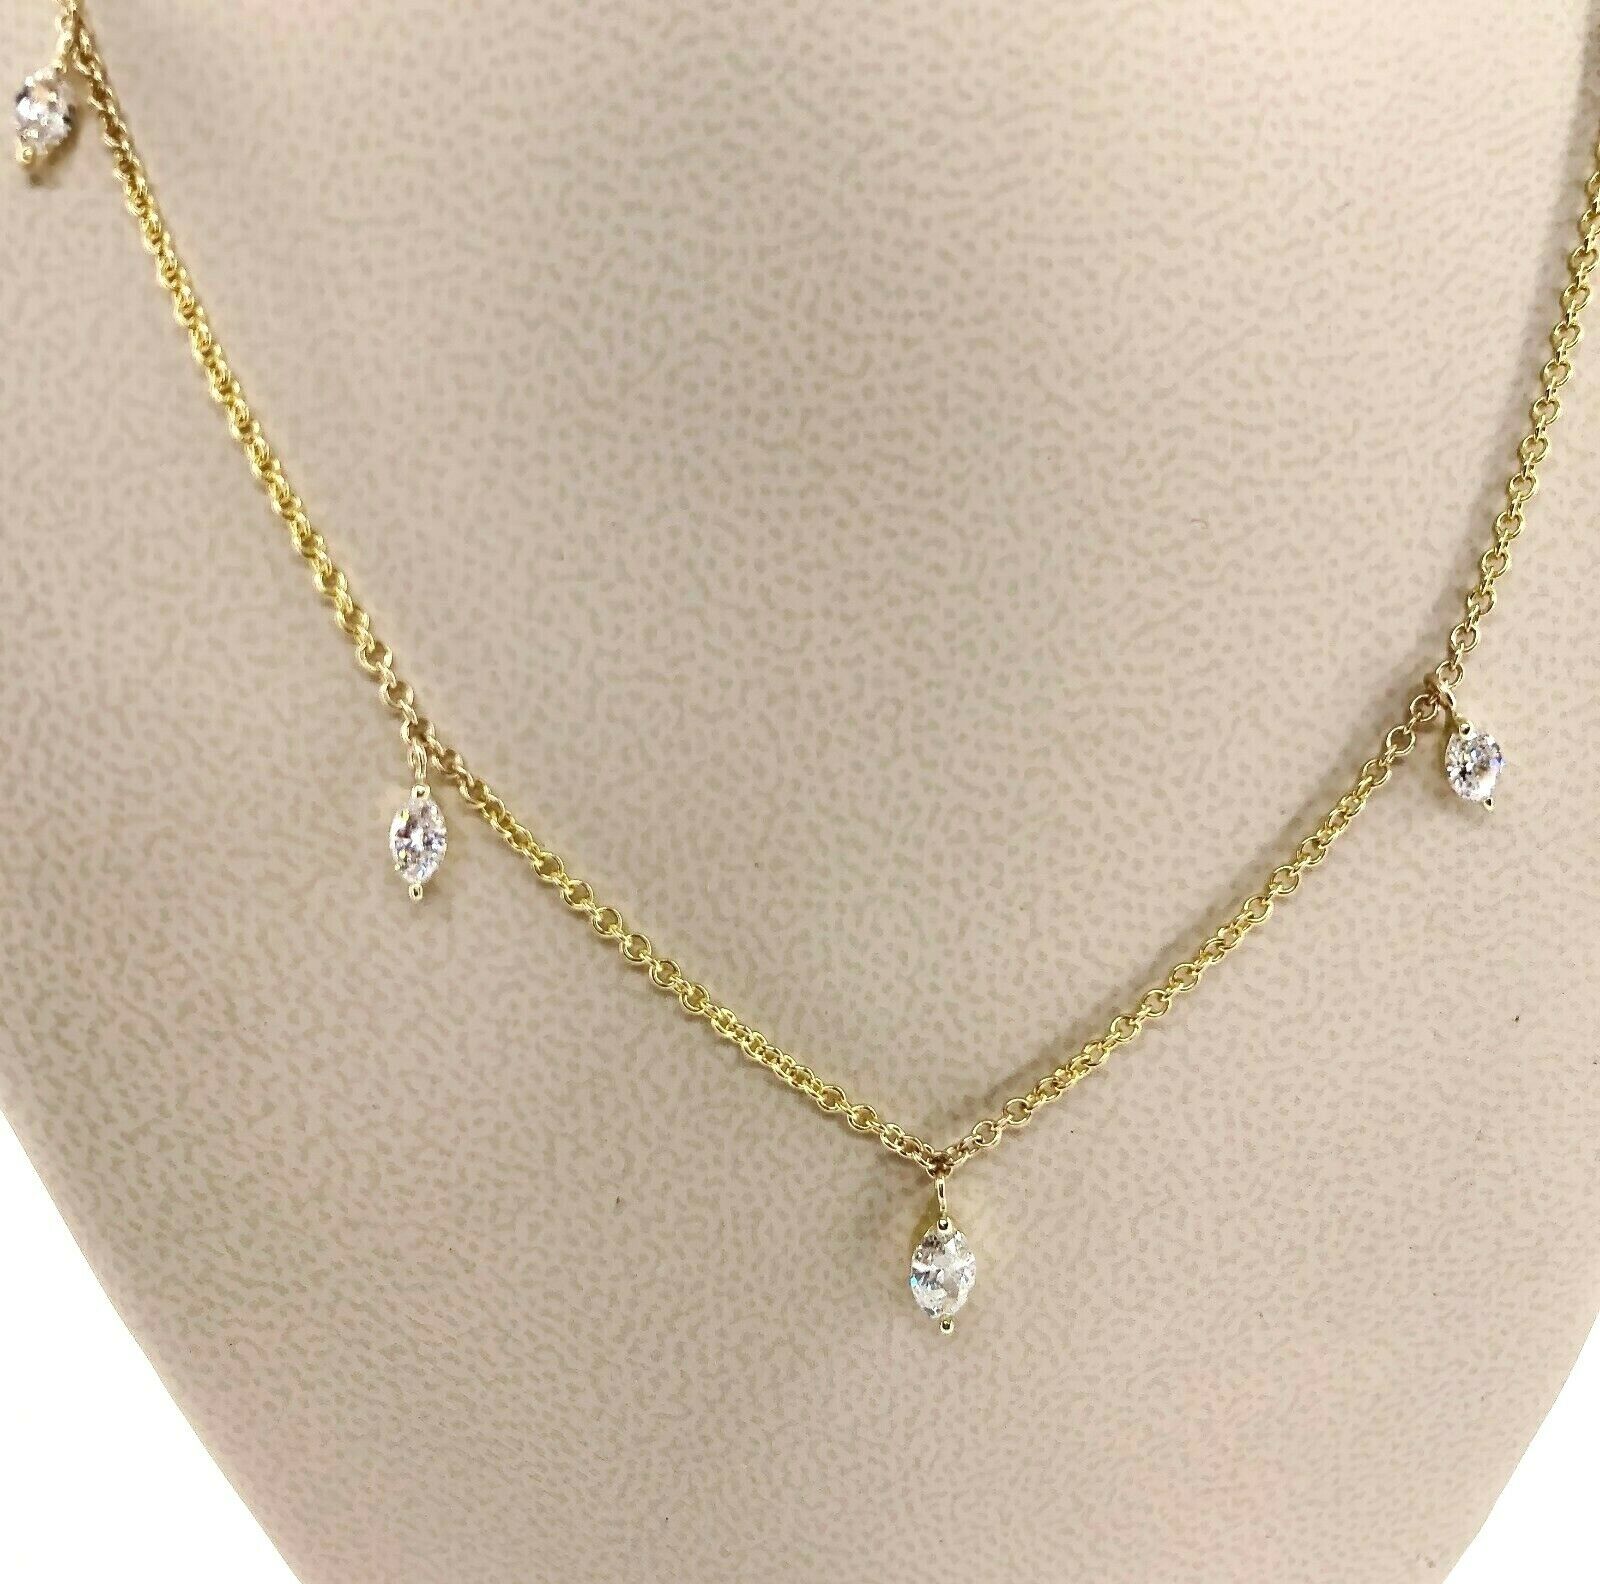 1.11 Carats t.w. Hand Assembled Marquise Diamond by The Yard Necklace Chain 14K